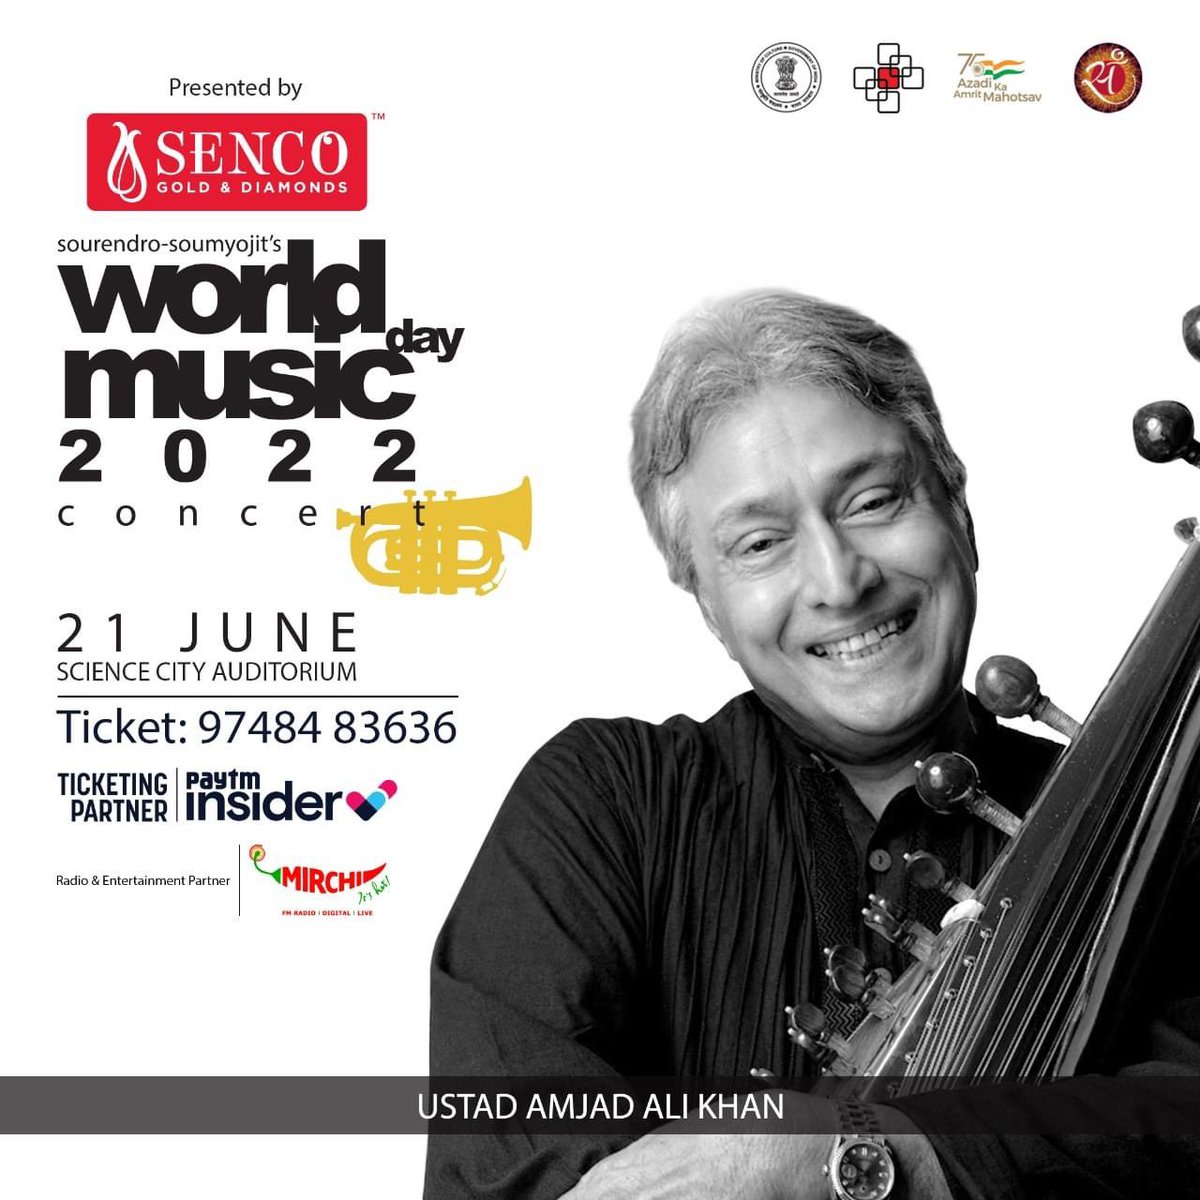 Wish you all a very happy World Music Day!! Concert at Science City, Kolkata today 21st June, 7:00 PM onwards! 

#WMD2022 #WorldMusicDay2022